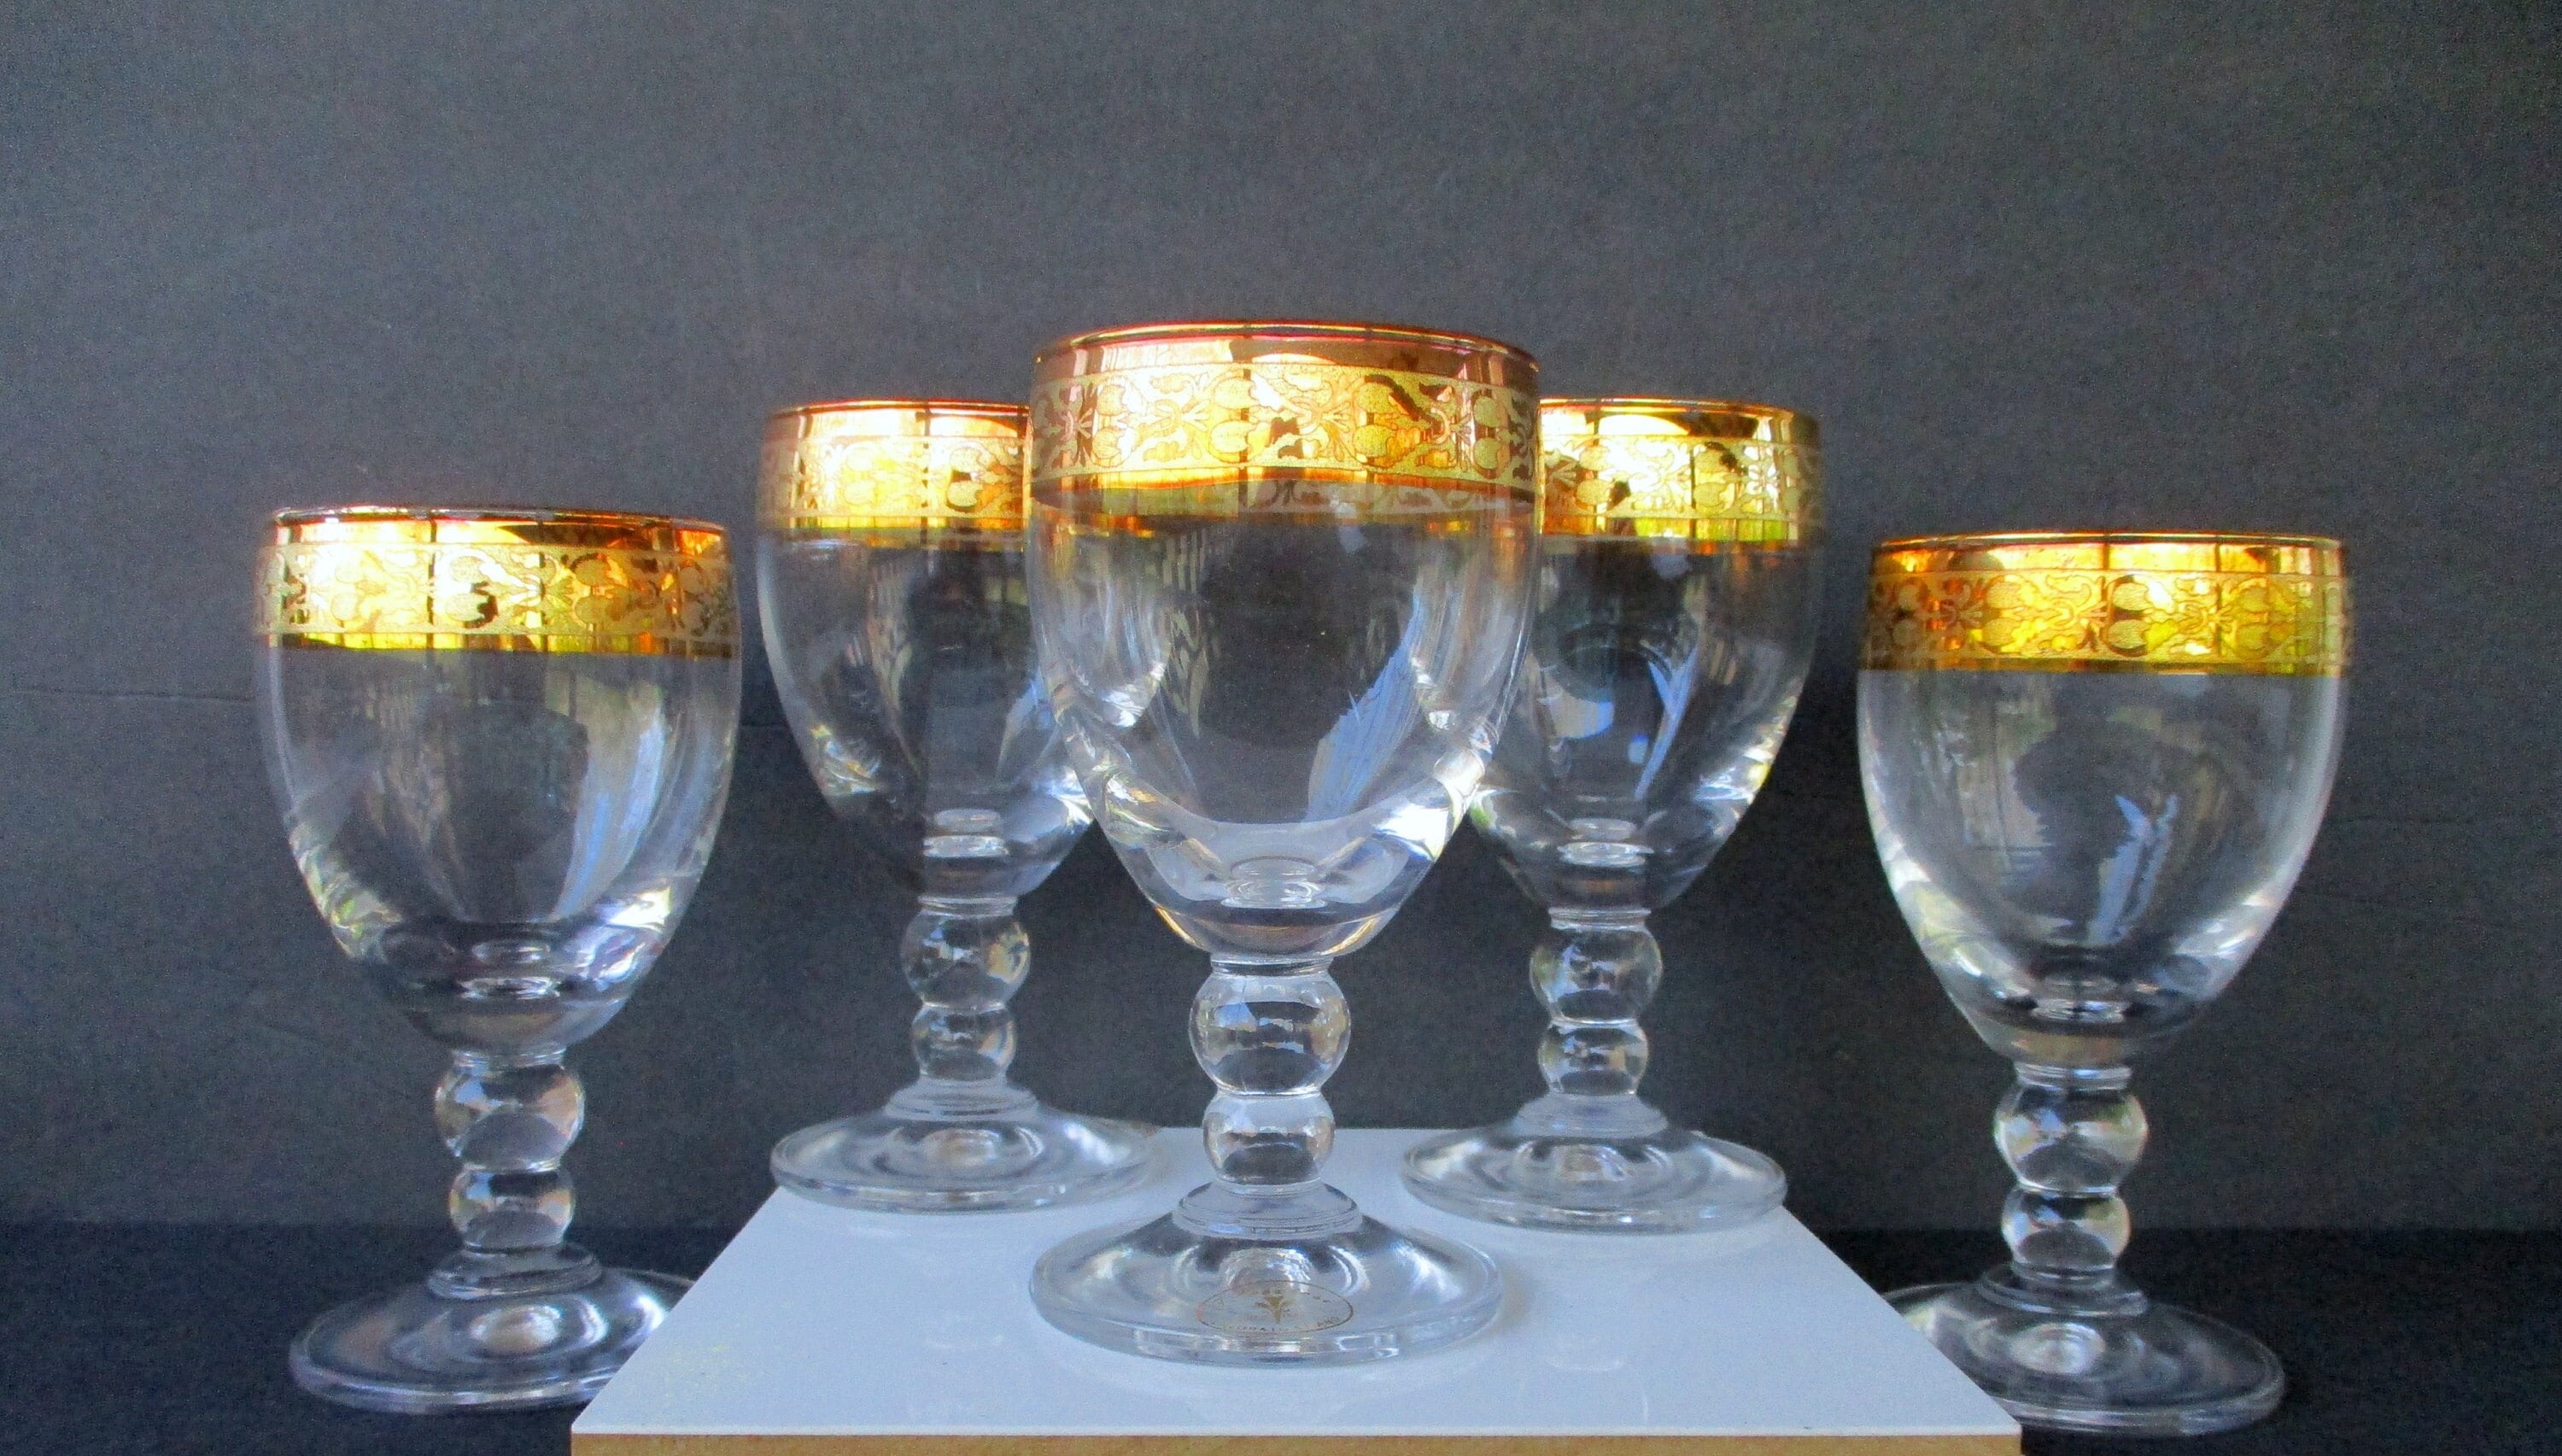 2 oz Sherry Wine Shot Glasses, Small Wine Glasses, Top-Notch Crystal  Hand-Cut Glasses Set, Exquisite Glassware for Sherry Wine, 6EA/SET